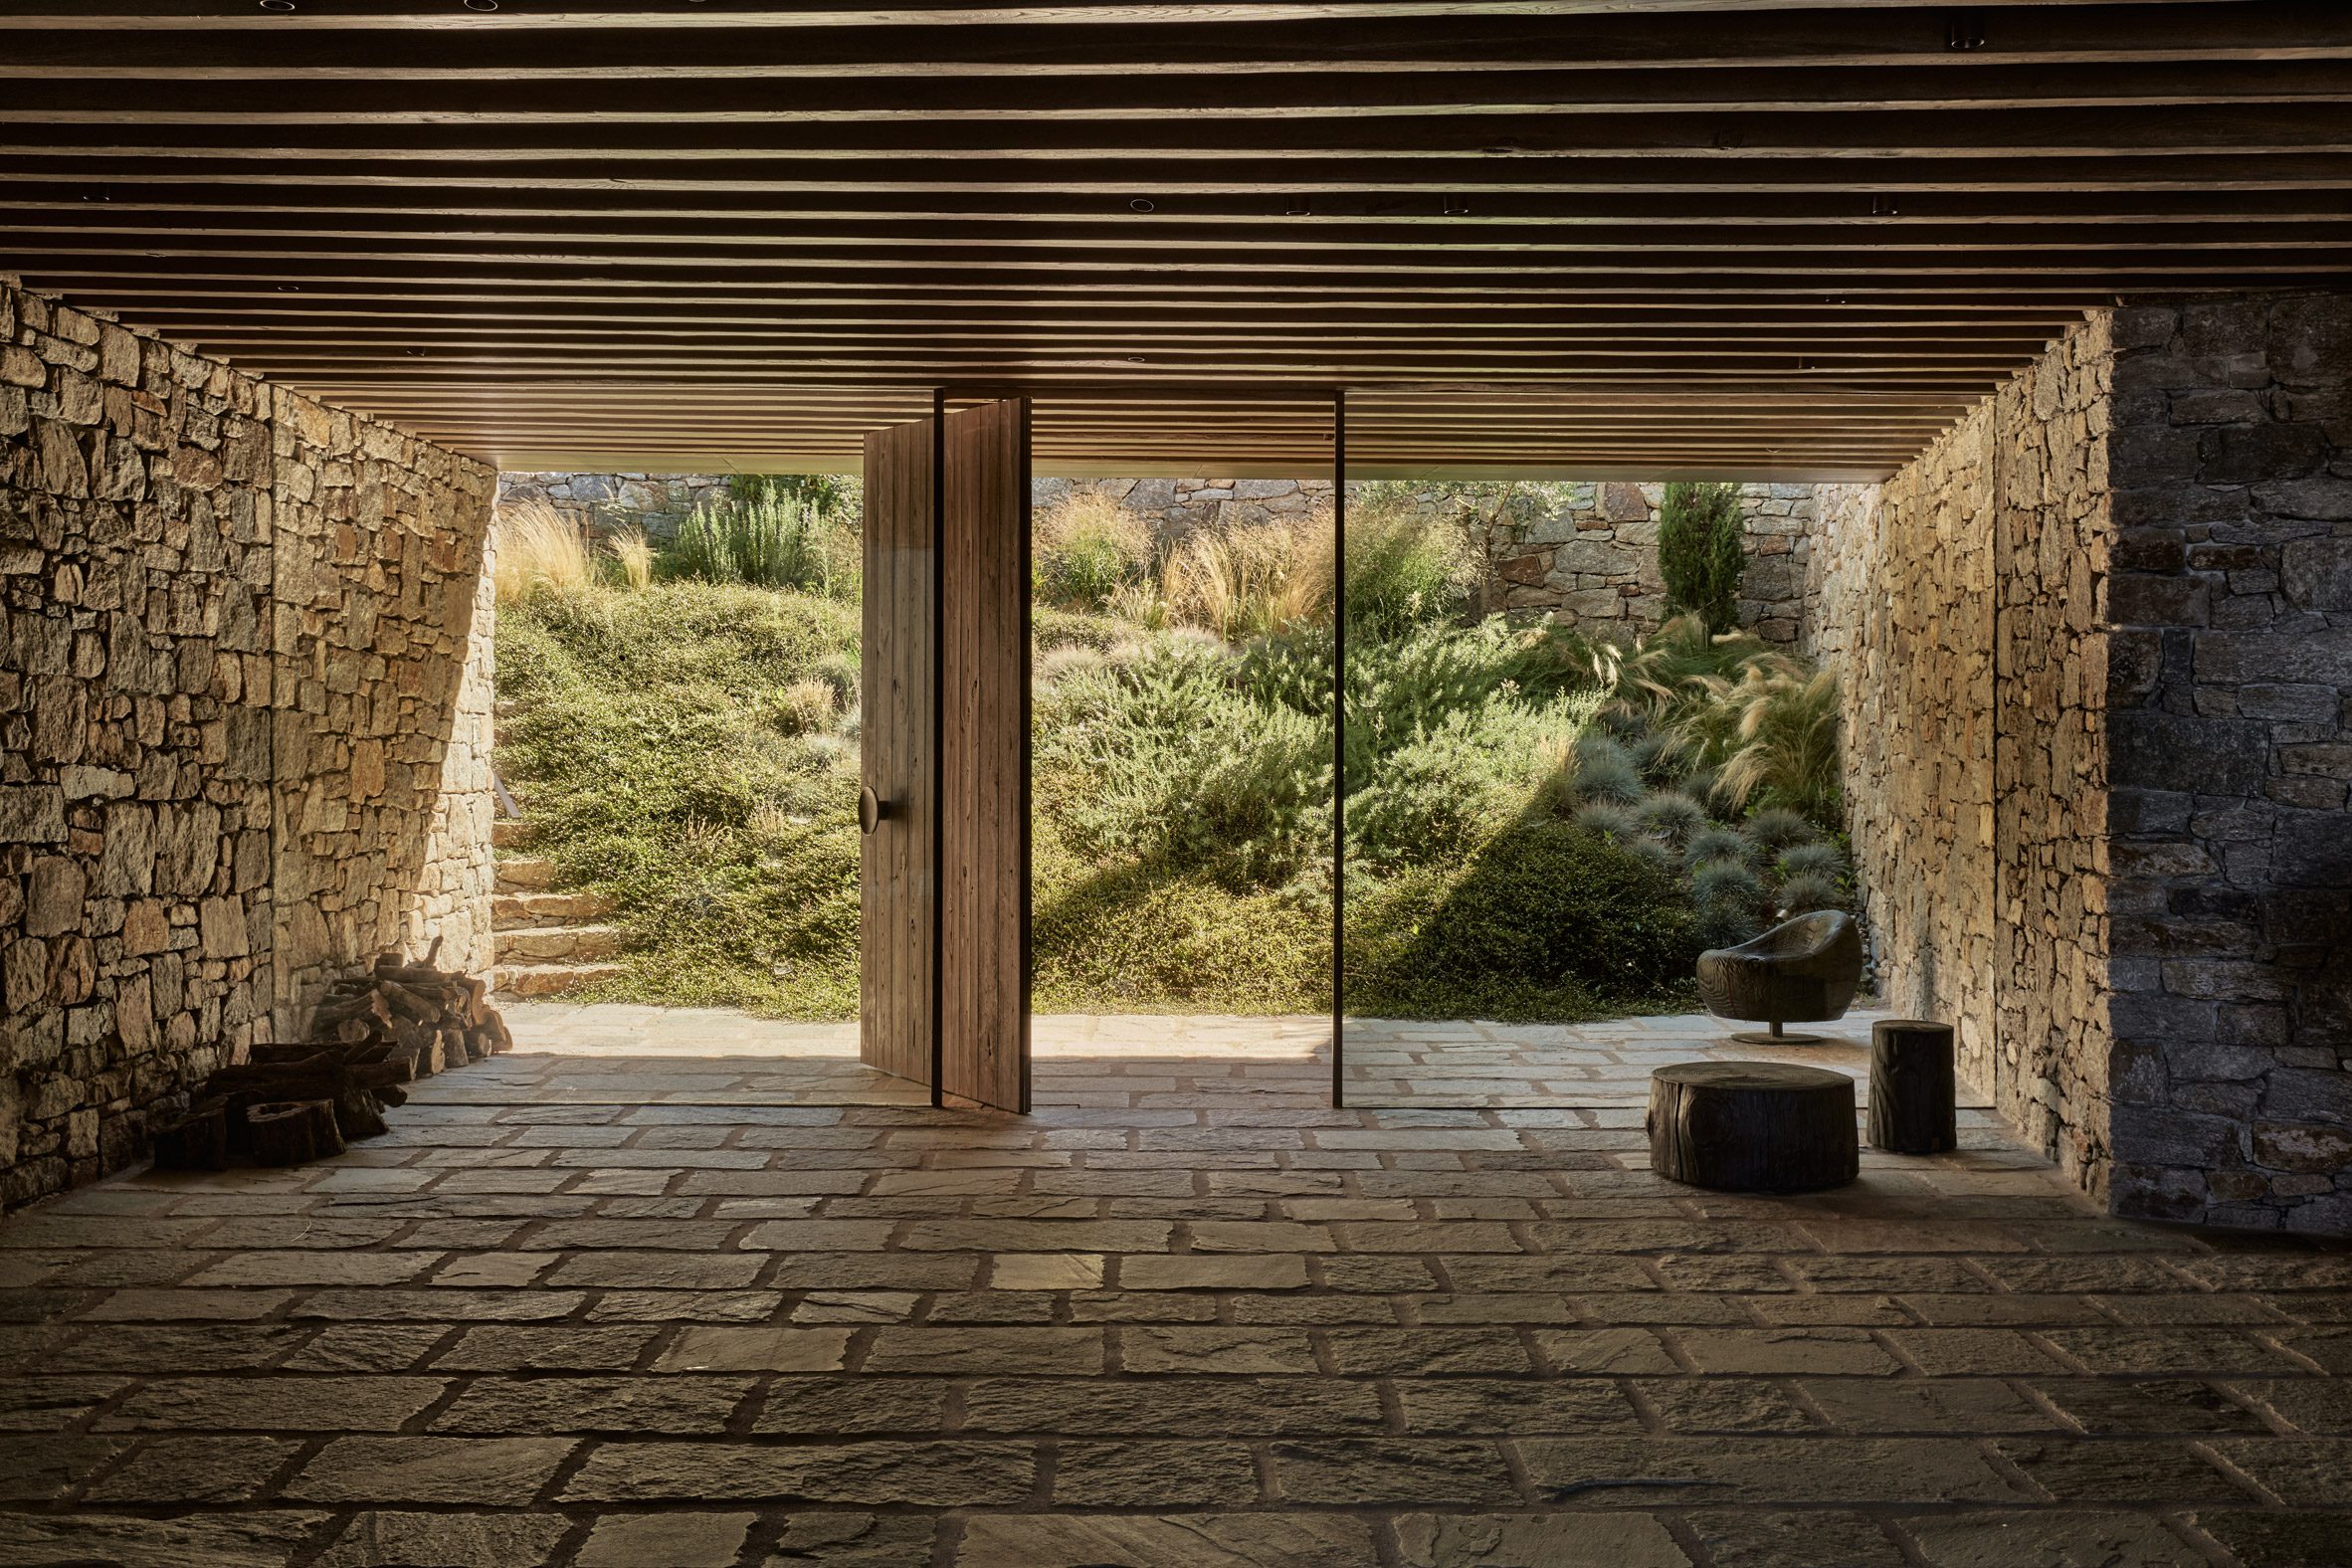 Glass doors in a stone room on a hillside